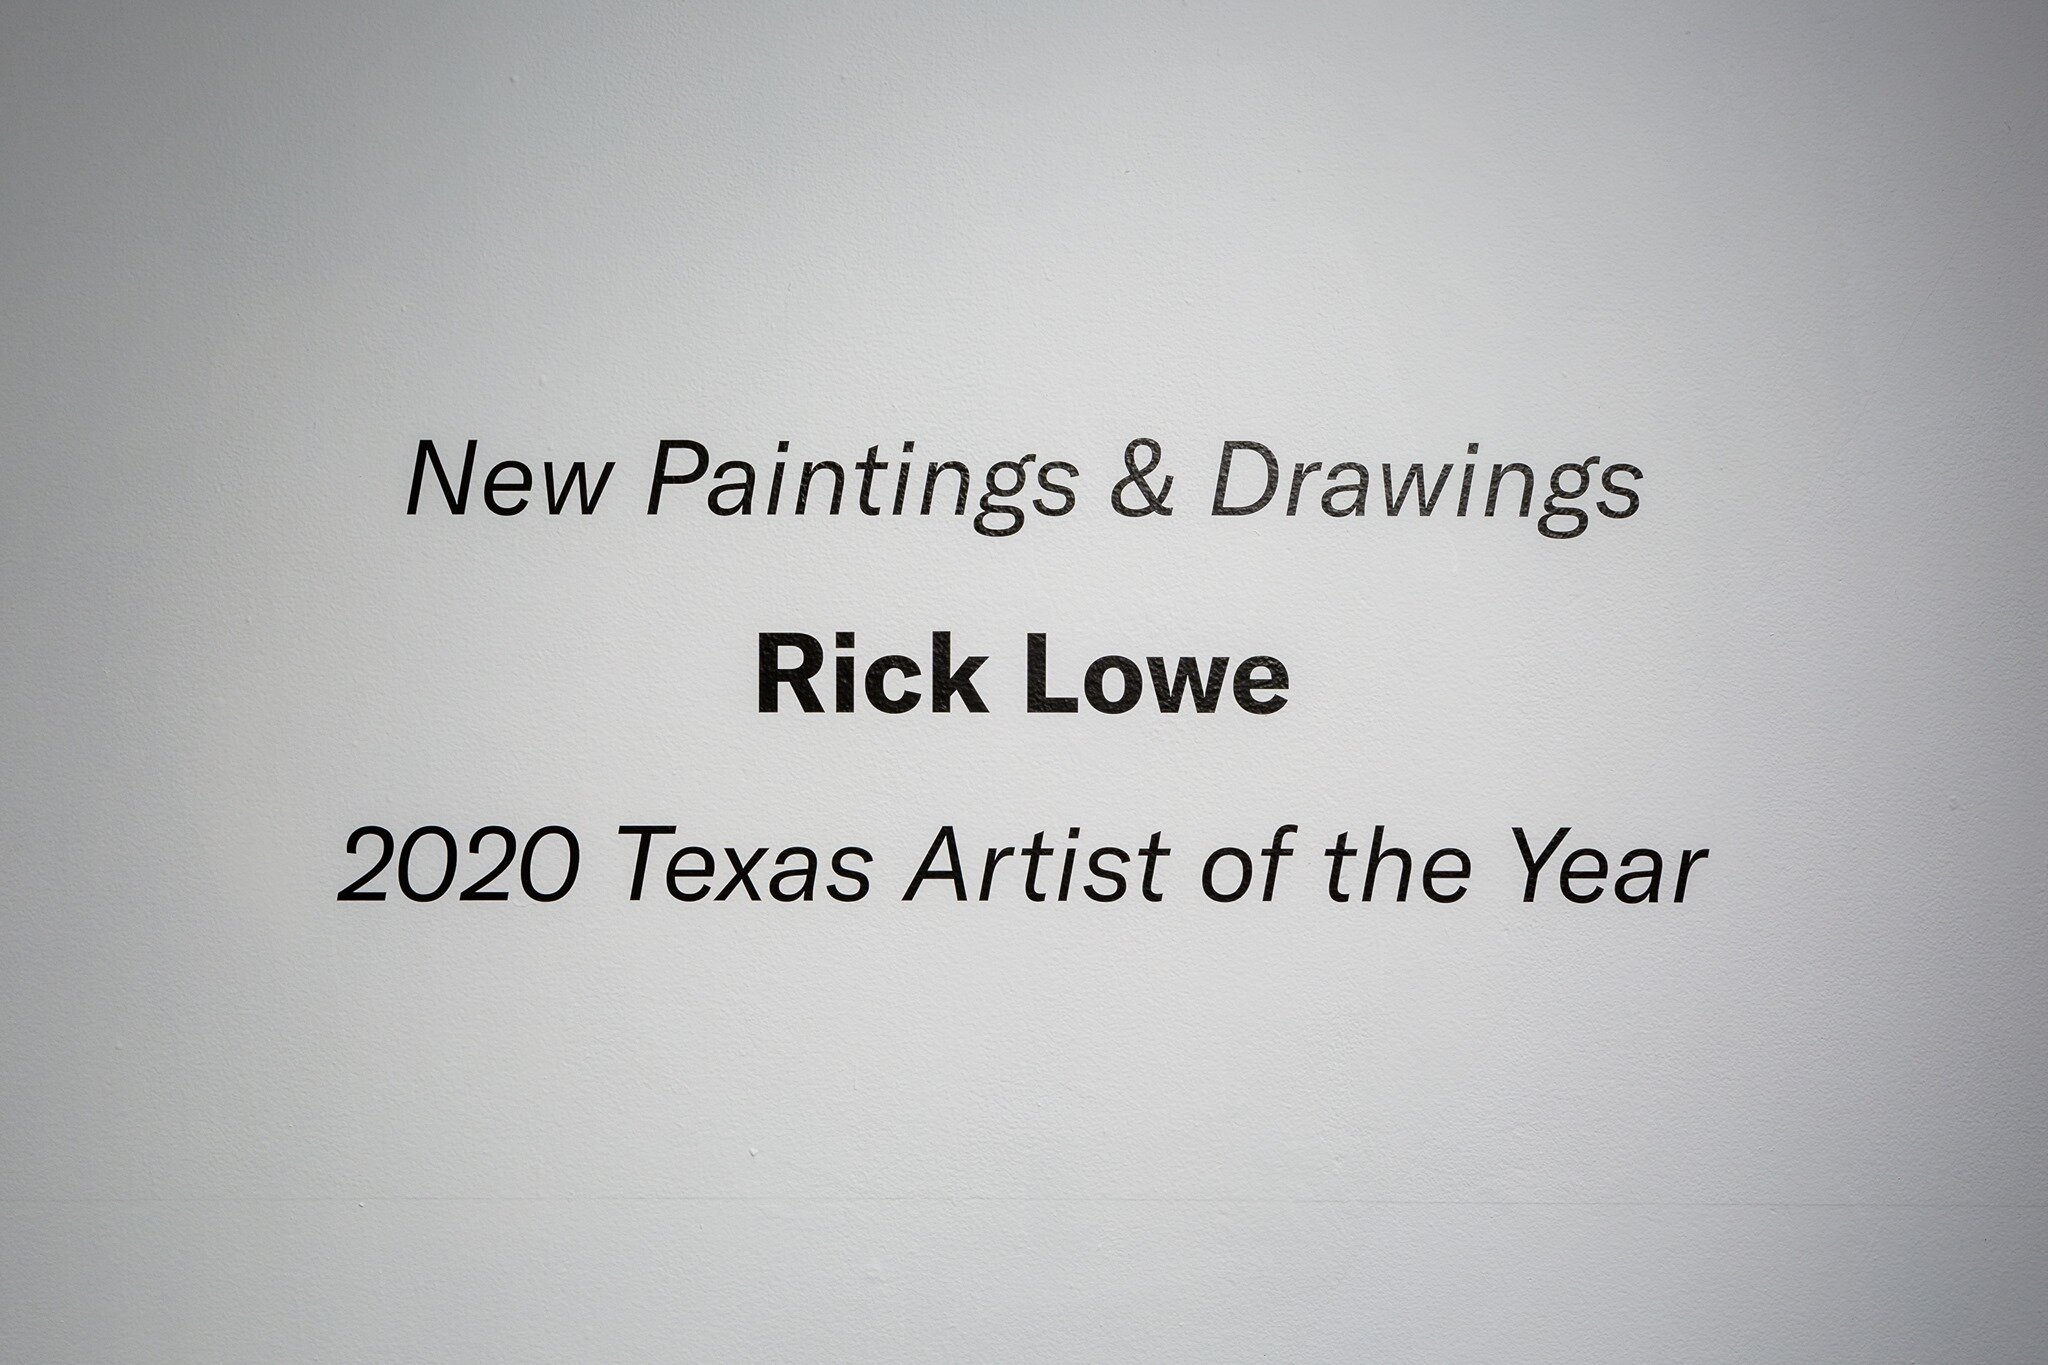  Exhibition at Art League Houston, 2020 Texas Artist of the Year  Photo Credit: Alex Barber 